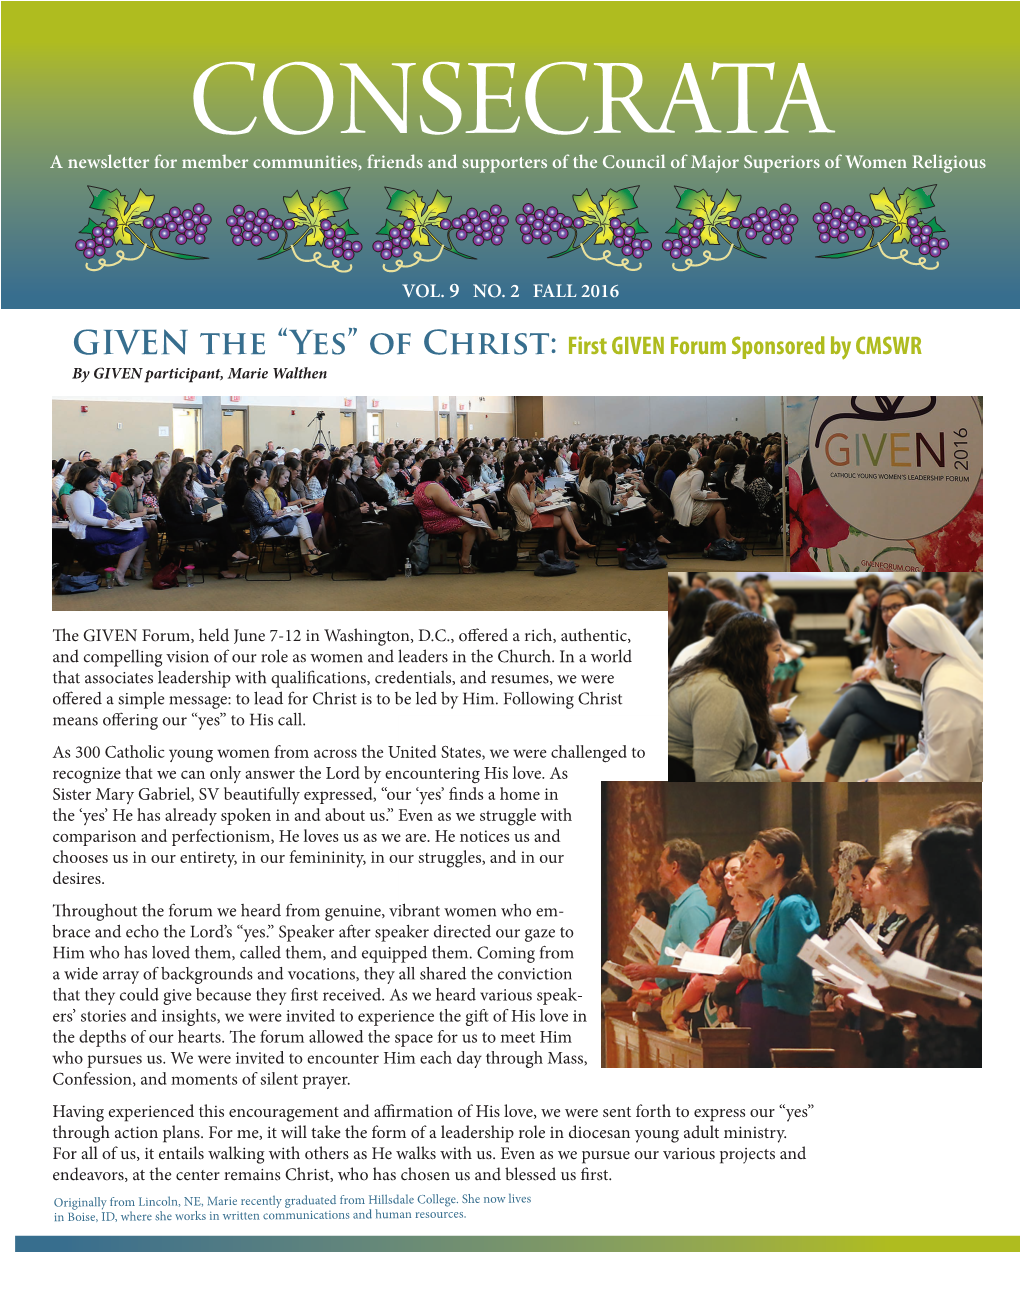 Of Christ: First GIVEN Forum Sponsored by CMSWR by GIVEN Participant, Marie Walthen